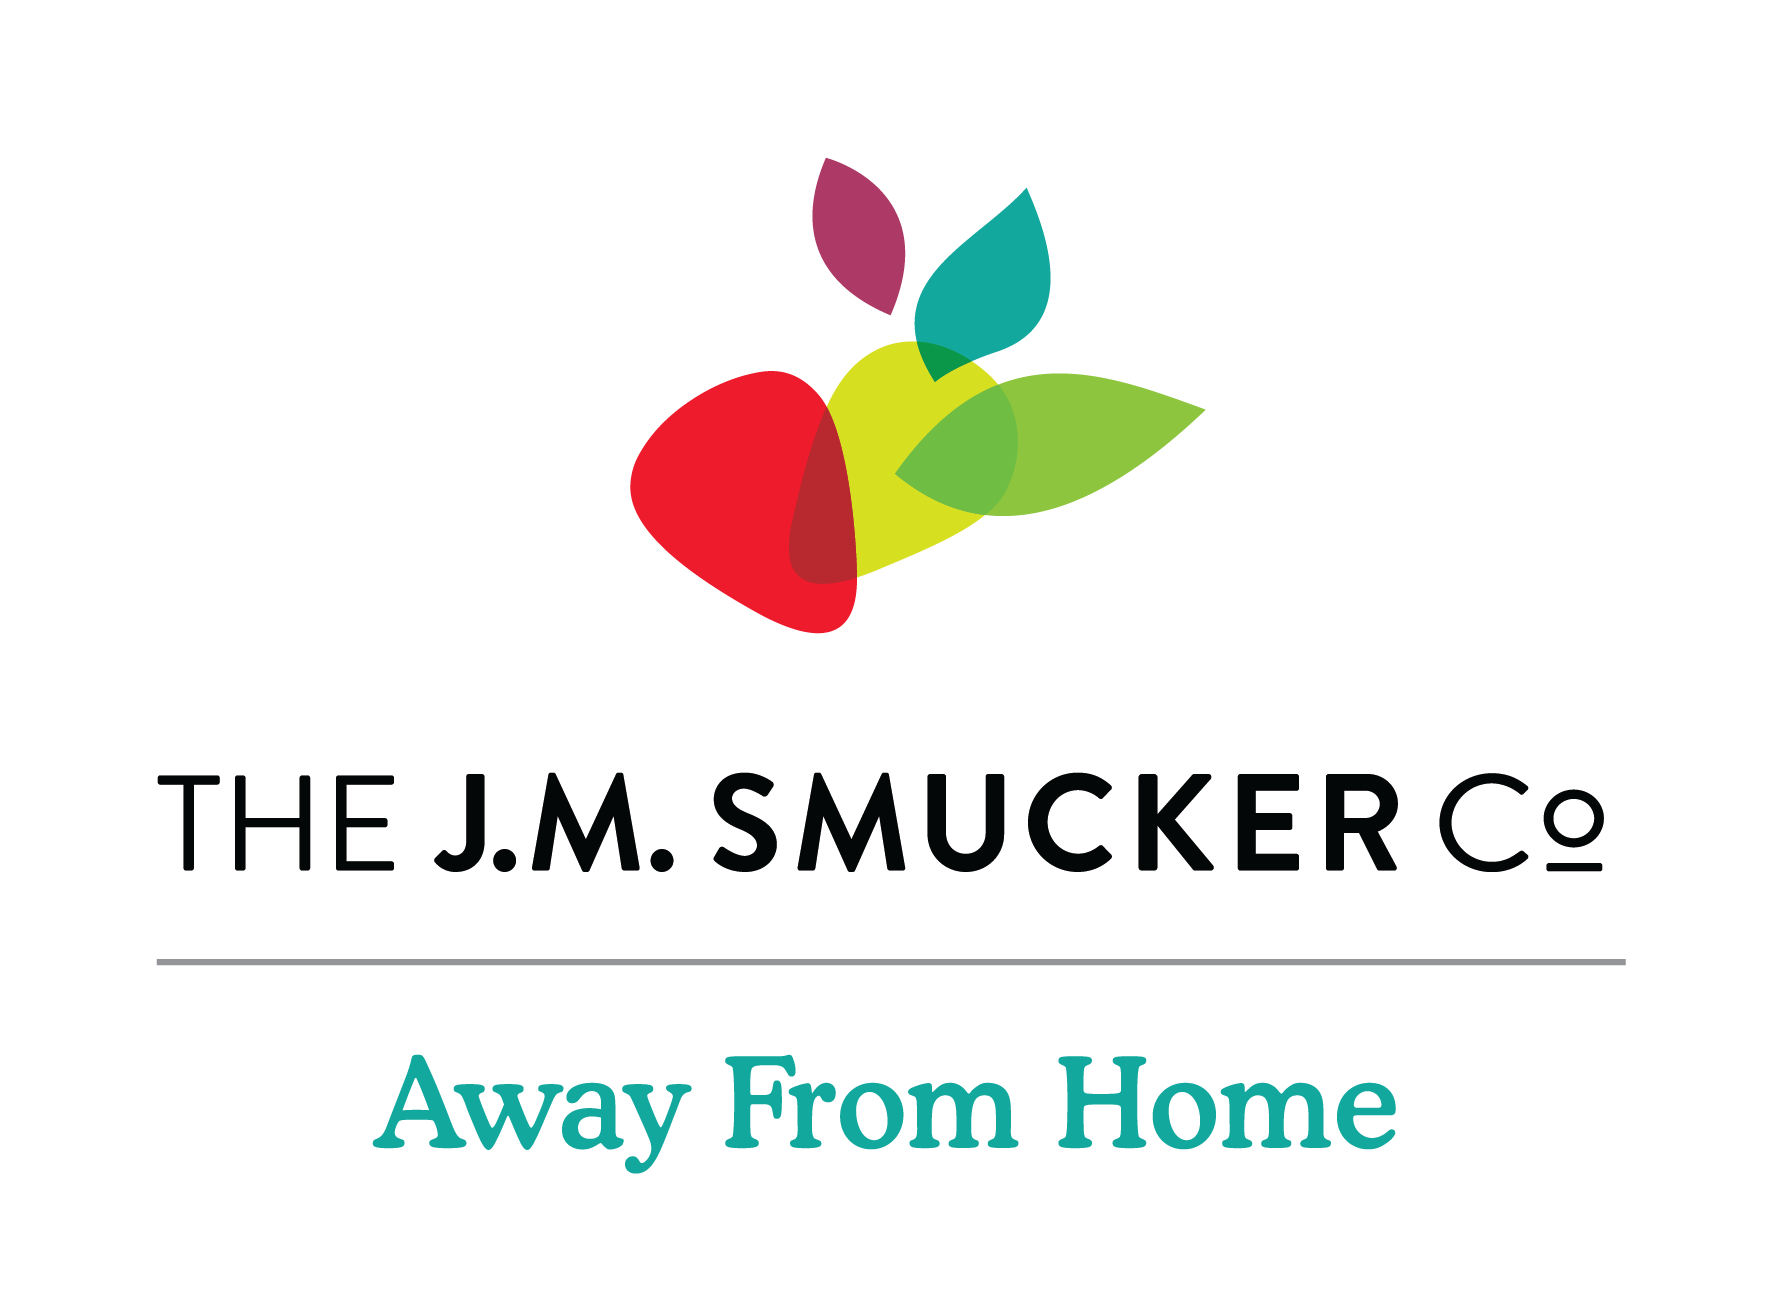 JM Smucker Co Away From Home